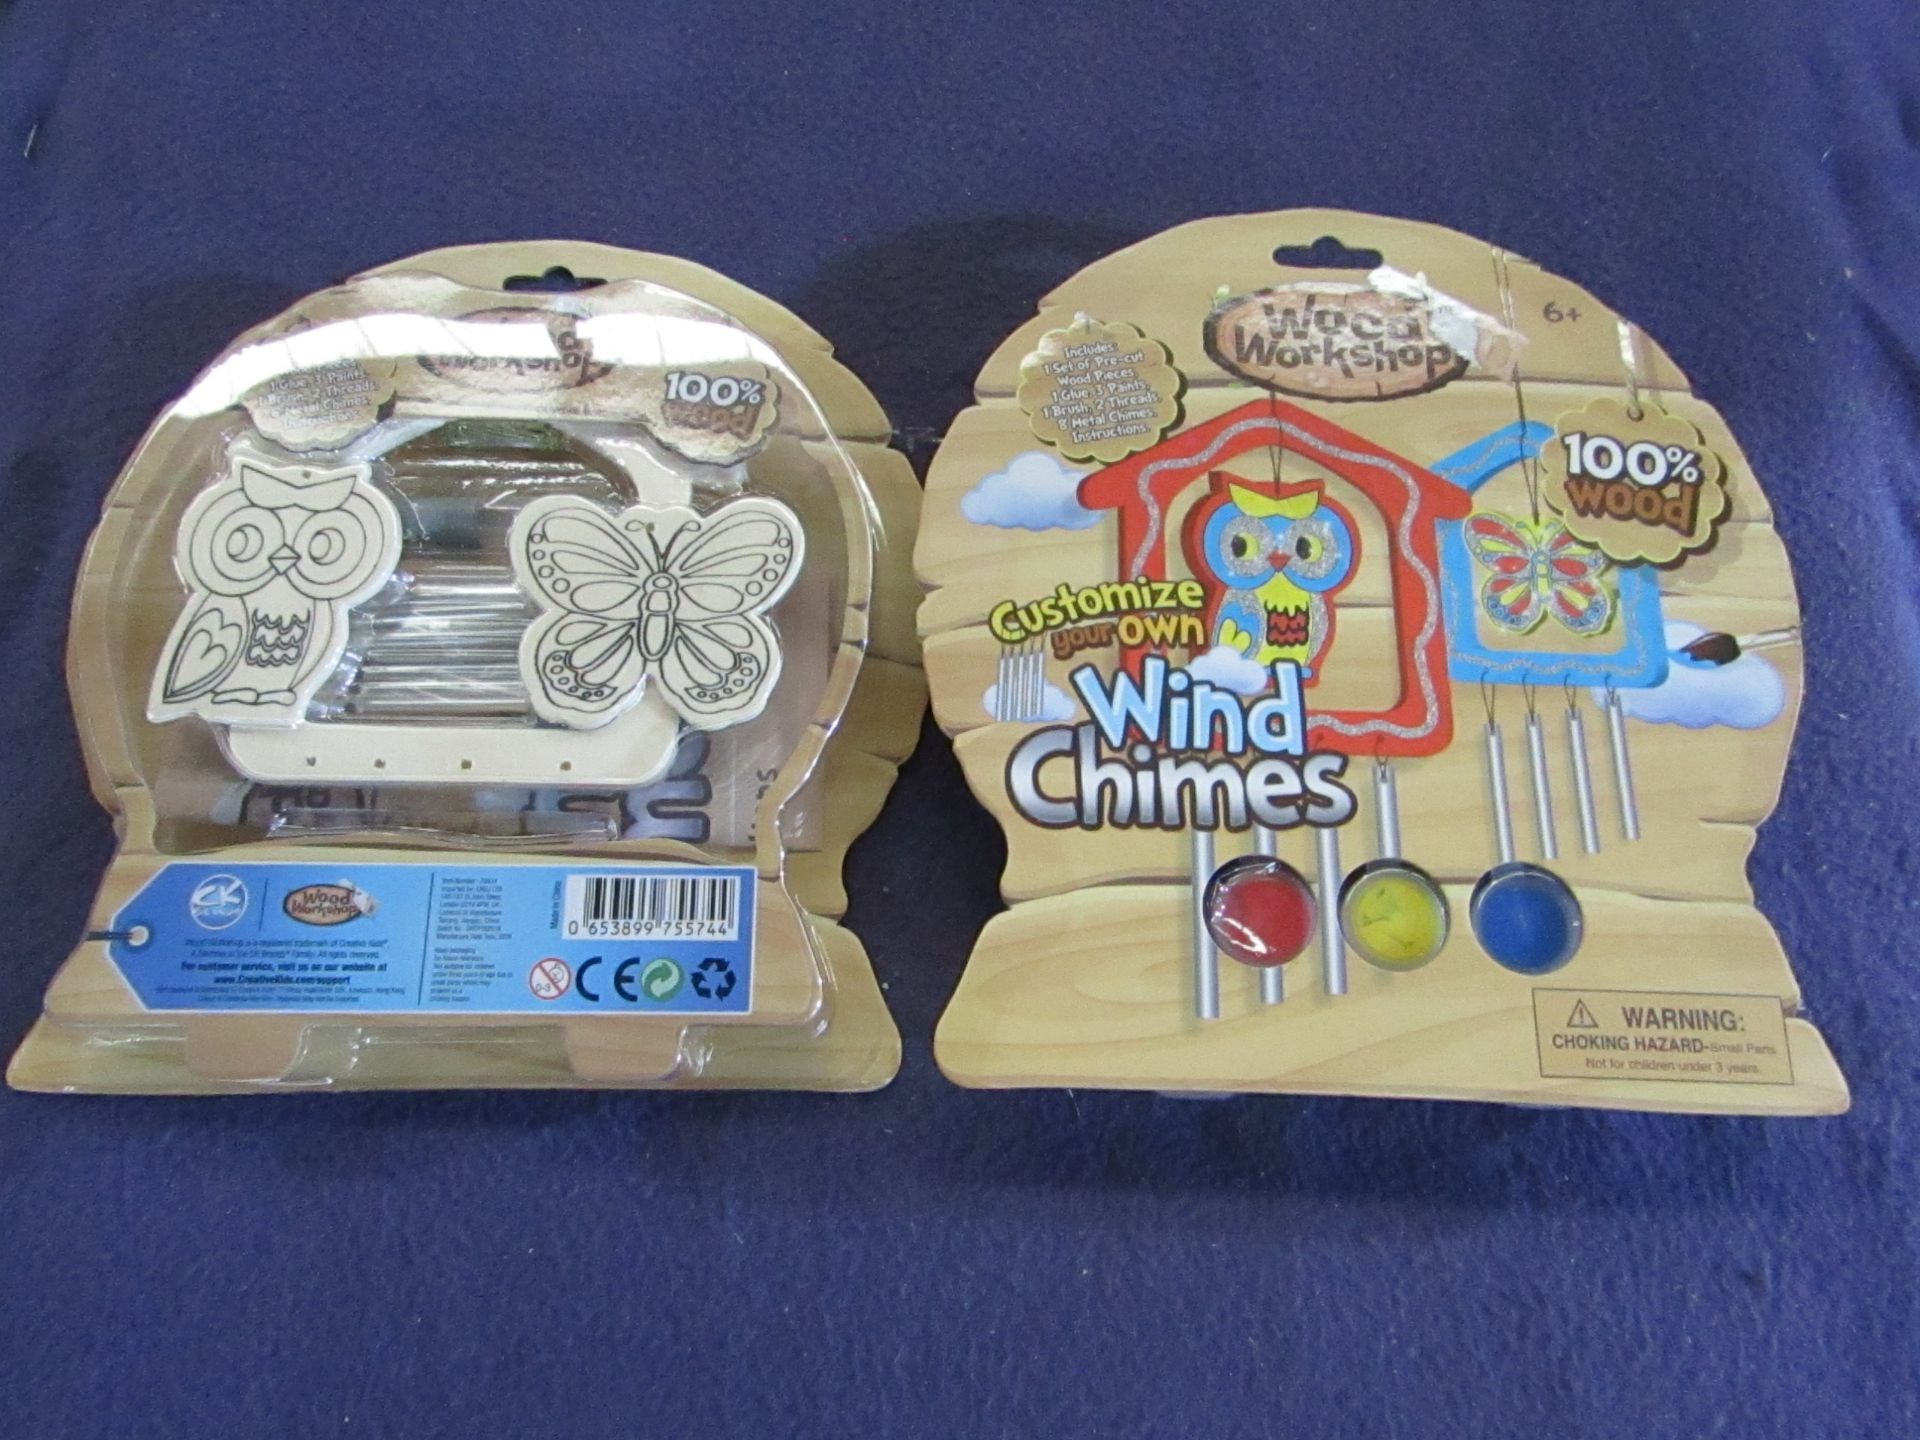 2x Wood Workshop - Customize Your Own Wind Chimes - Unused & Packaged.